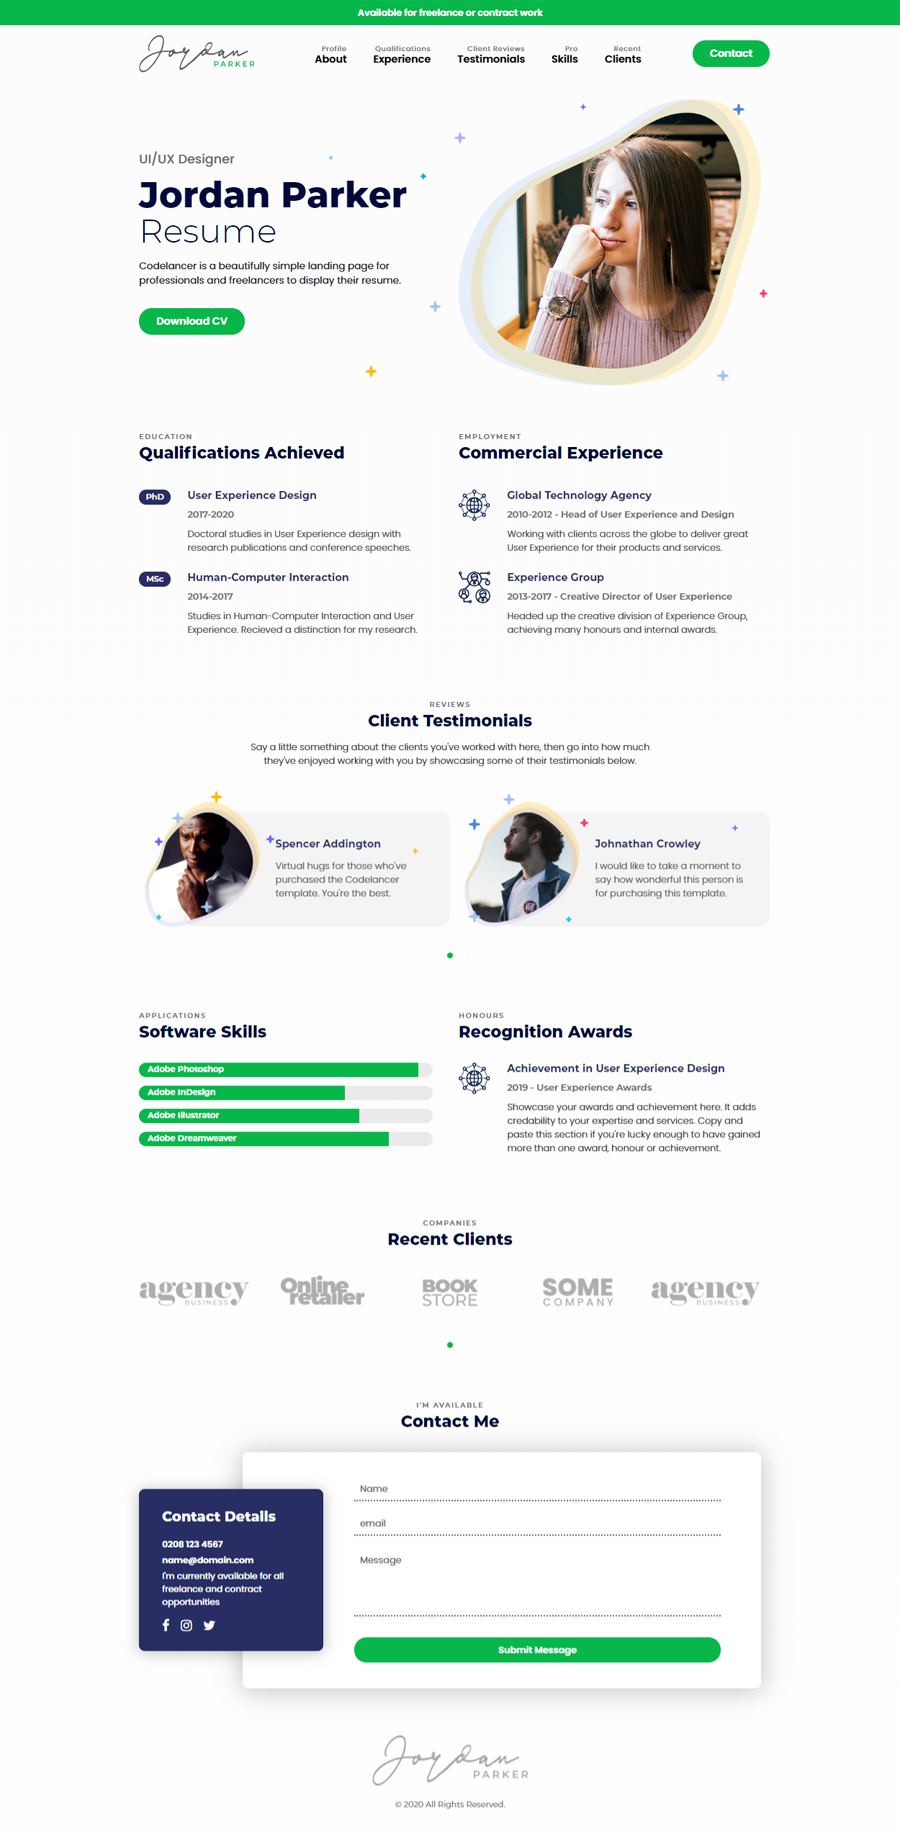 CODELANCER - Personal HTML Resume / CV Landing Page Template for Freelancers and Professionals - 1